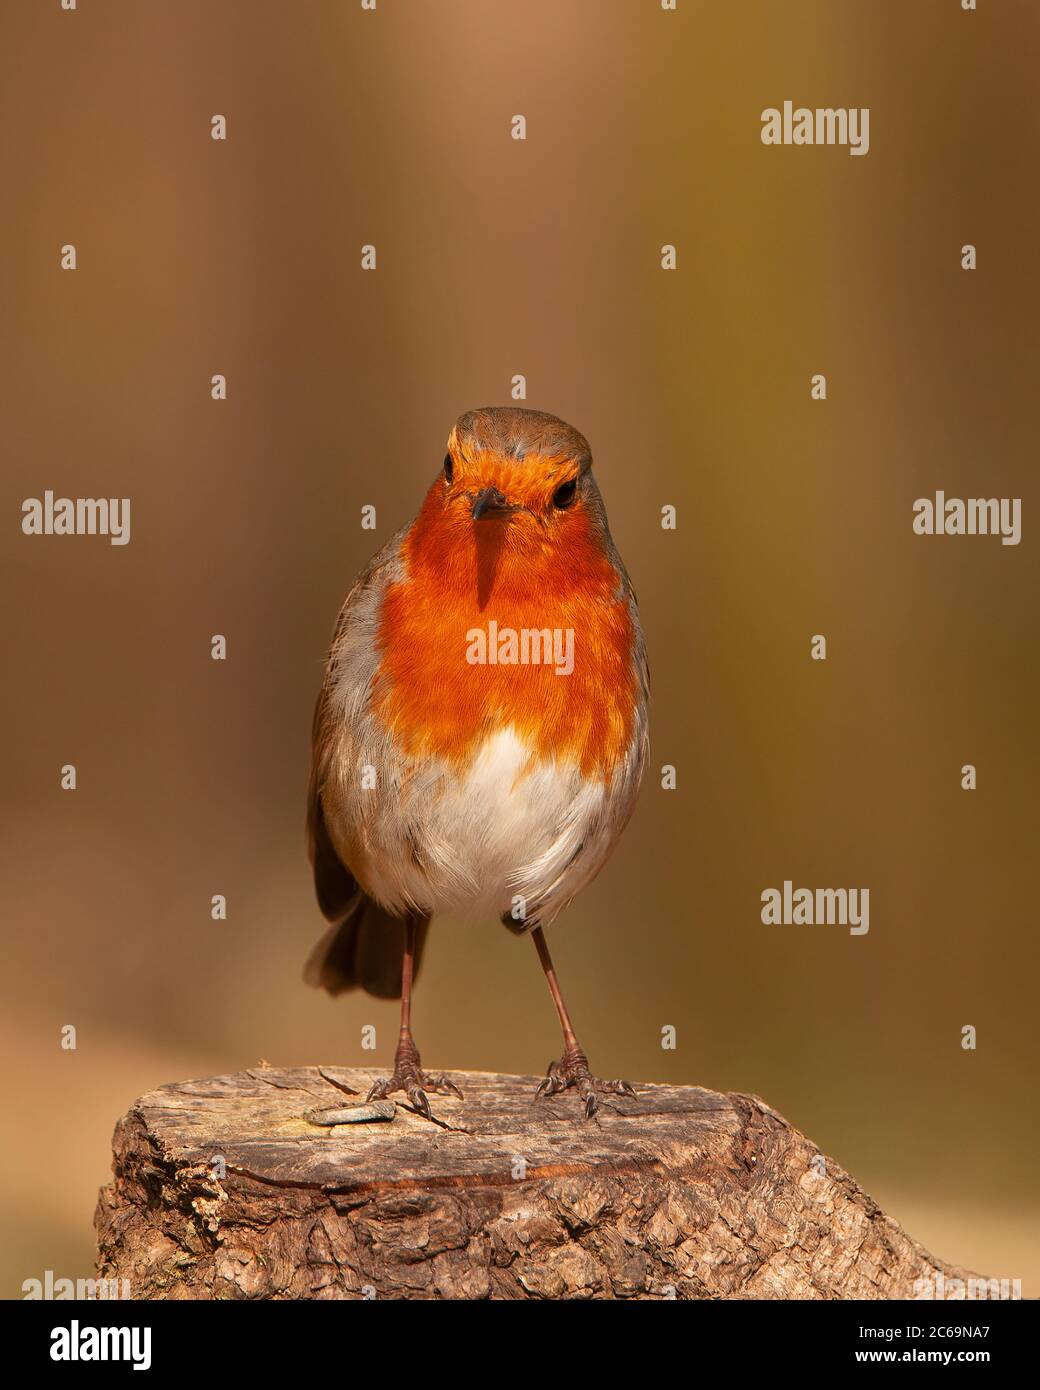 Robin redbreast, Erithacus rubecula, on tree stump with blurred background Stock Photo